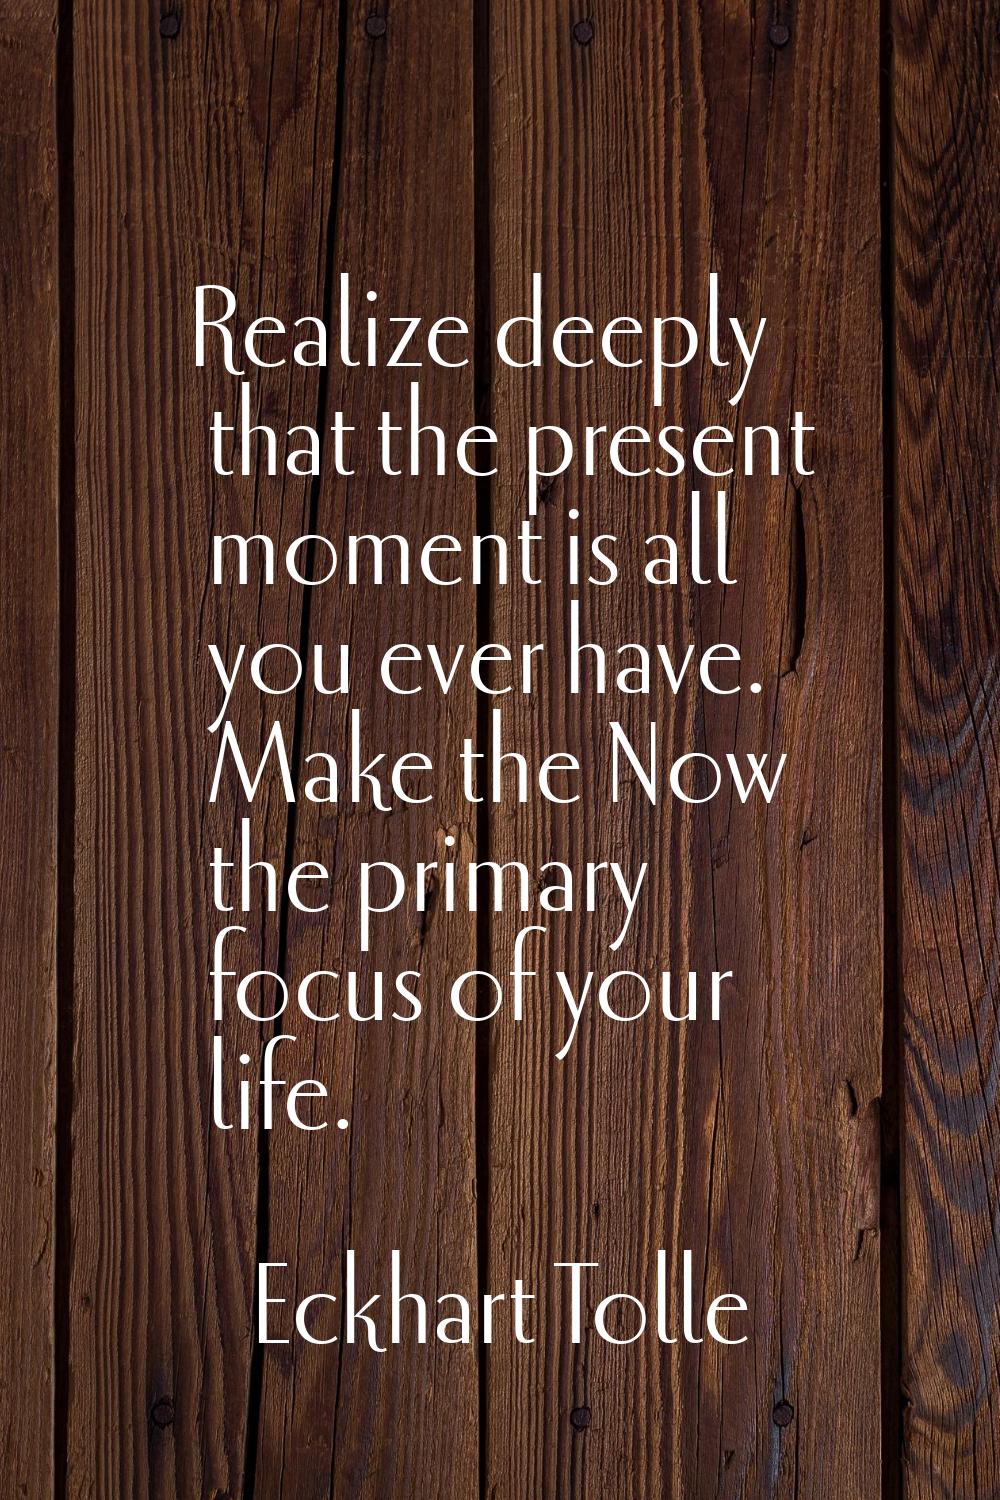 Realize deeply that the present moment is all you ever have. Make the Now the primary focus of your